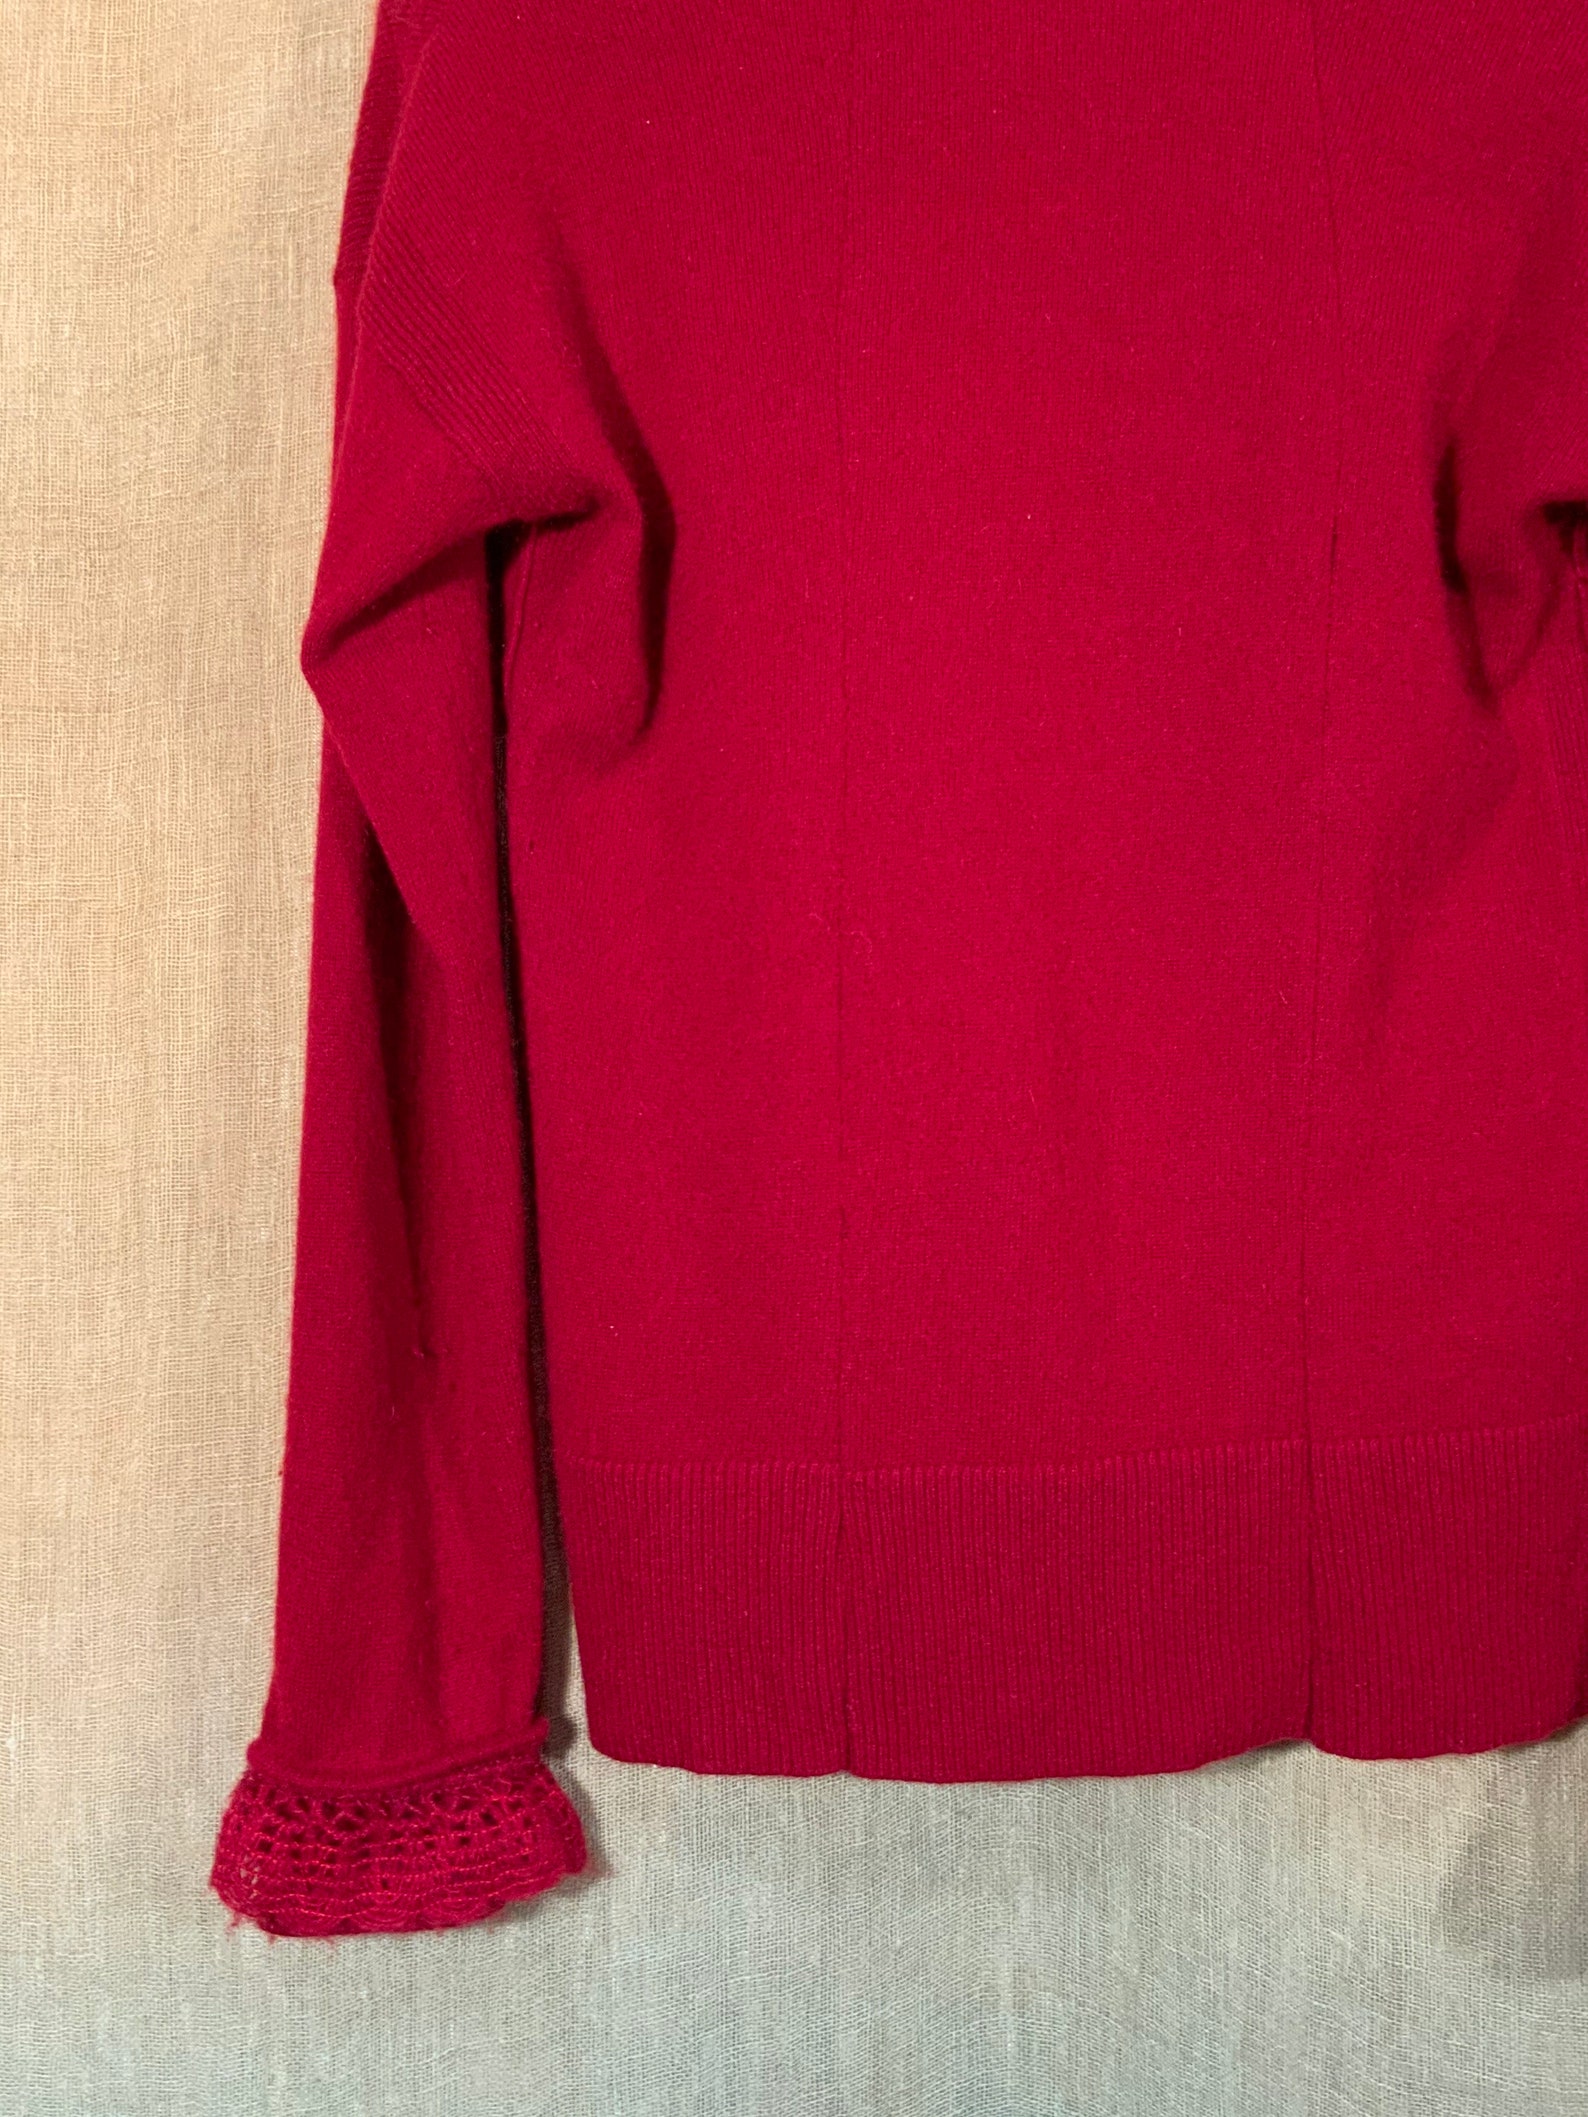 Vintage red long sleeve with ruffle cuff very soft 100% | Etsy